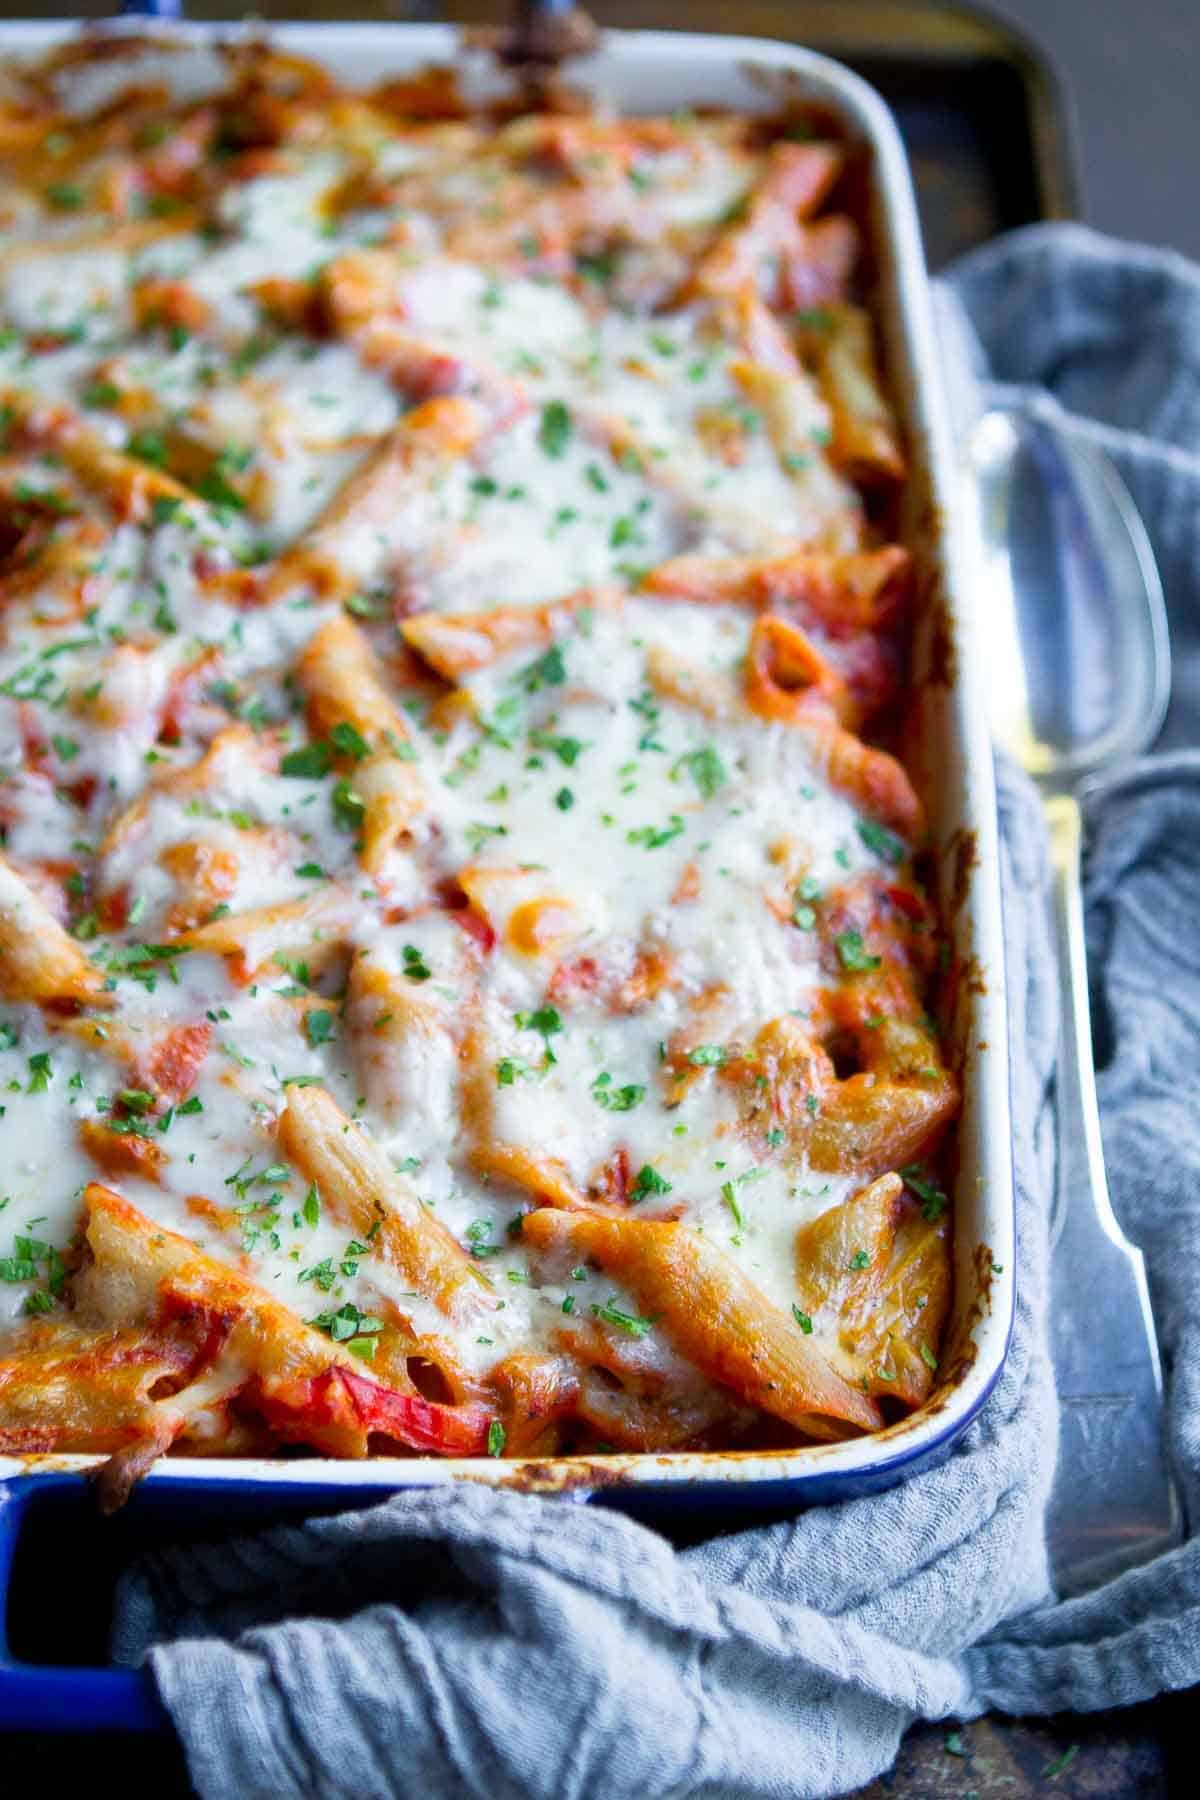 A blue casserole dish filled with baked pasta with sausage and cheese.